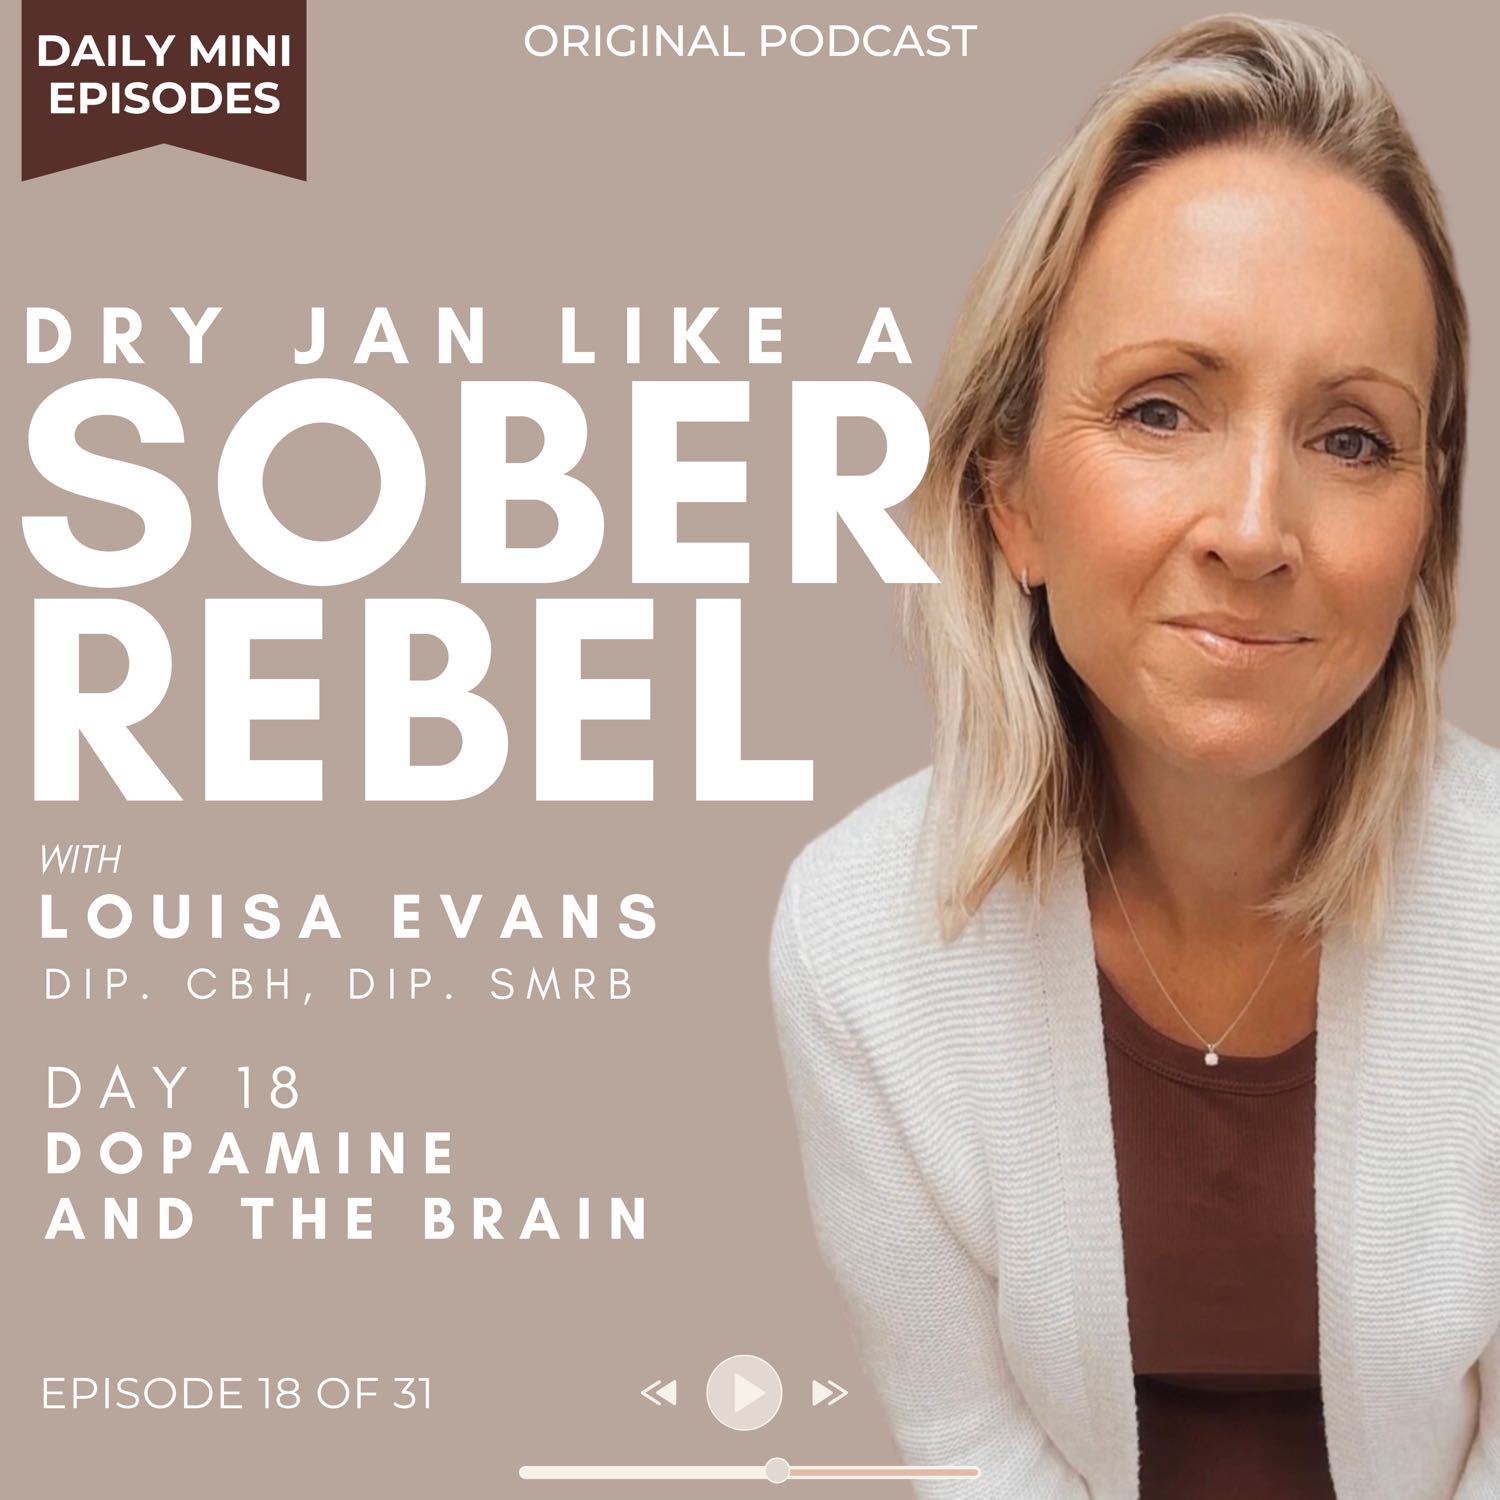 Dry Jan like a Sober Rebel | Dopamine and the brain | Day 18